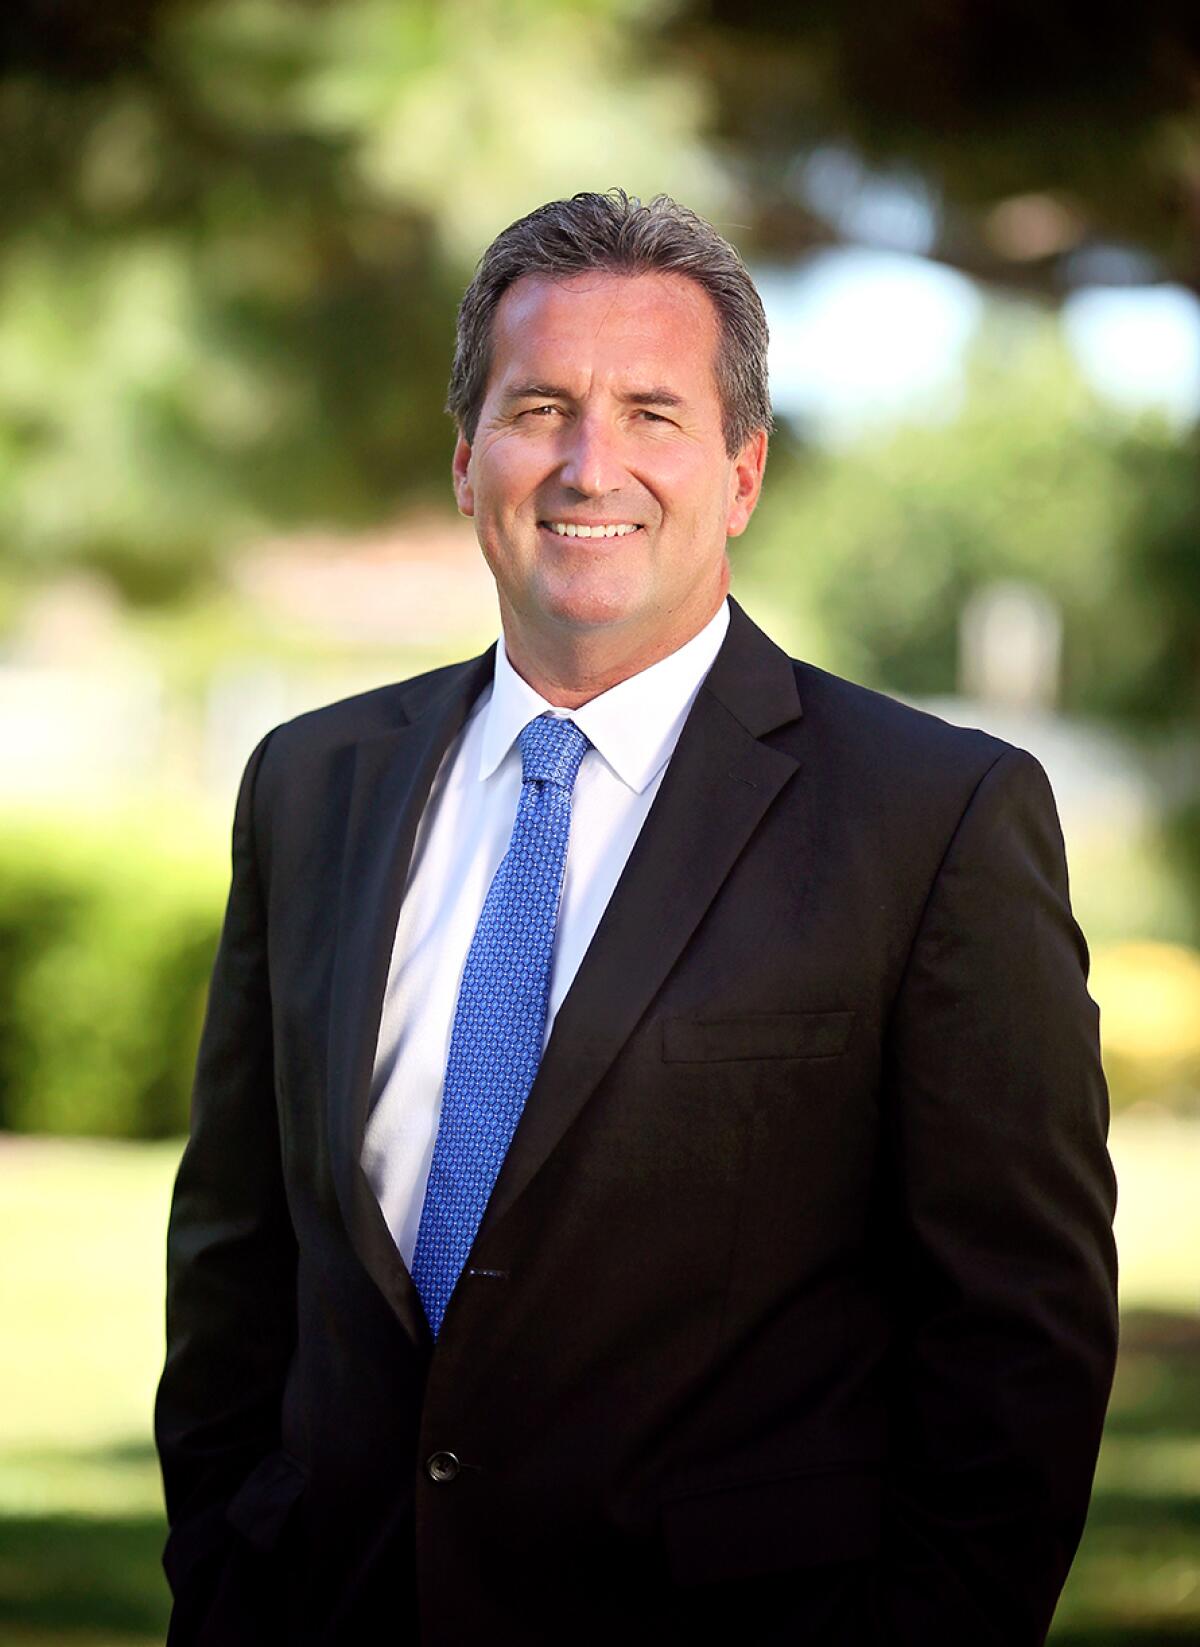 Robert Hall served as the city manager of Fountain Valley from 2013 to 2017.